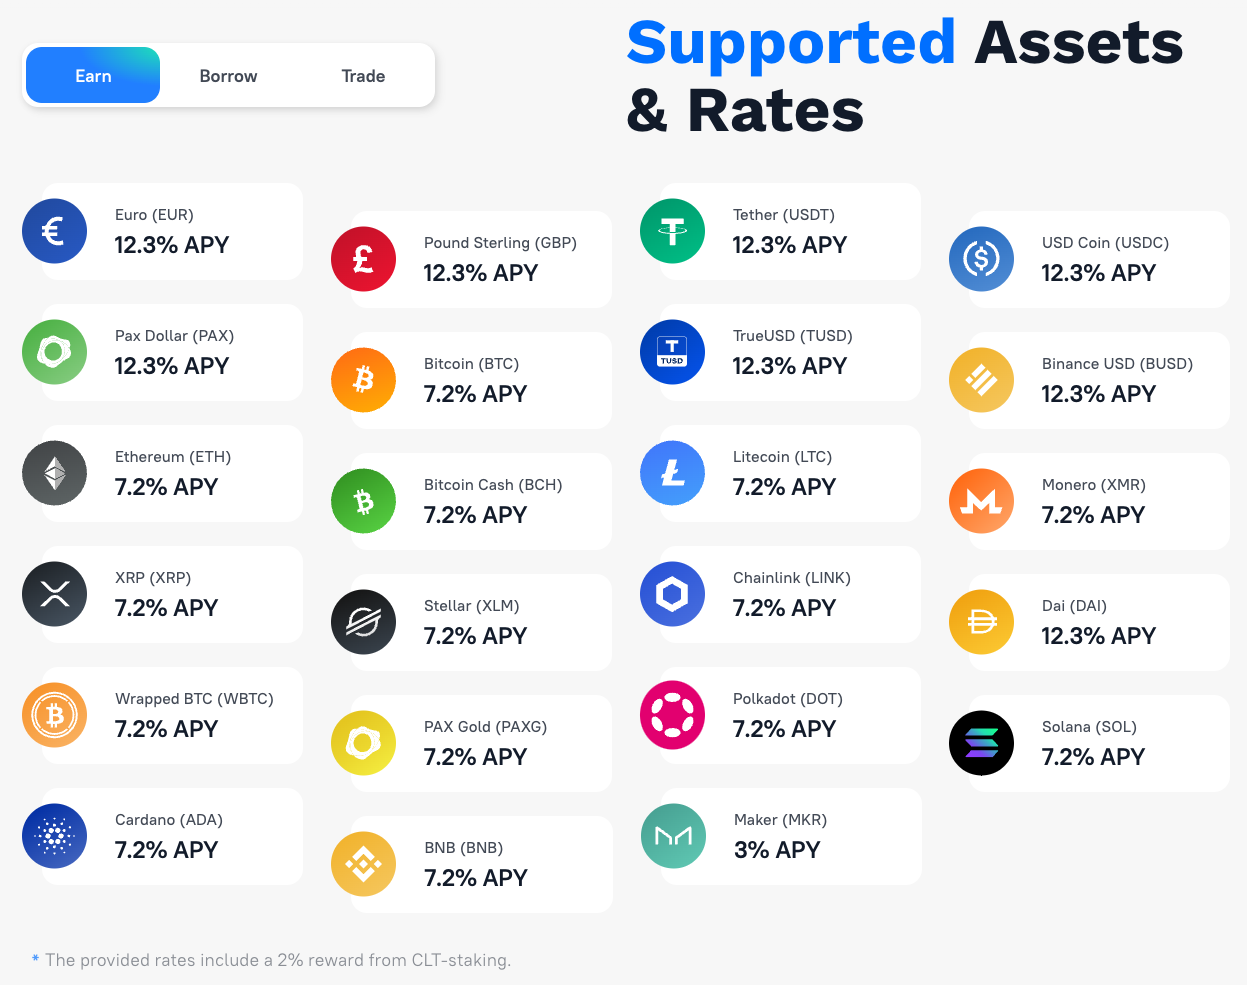 Coinloan Review: Supported Assets